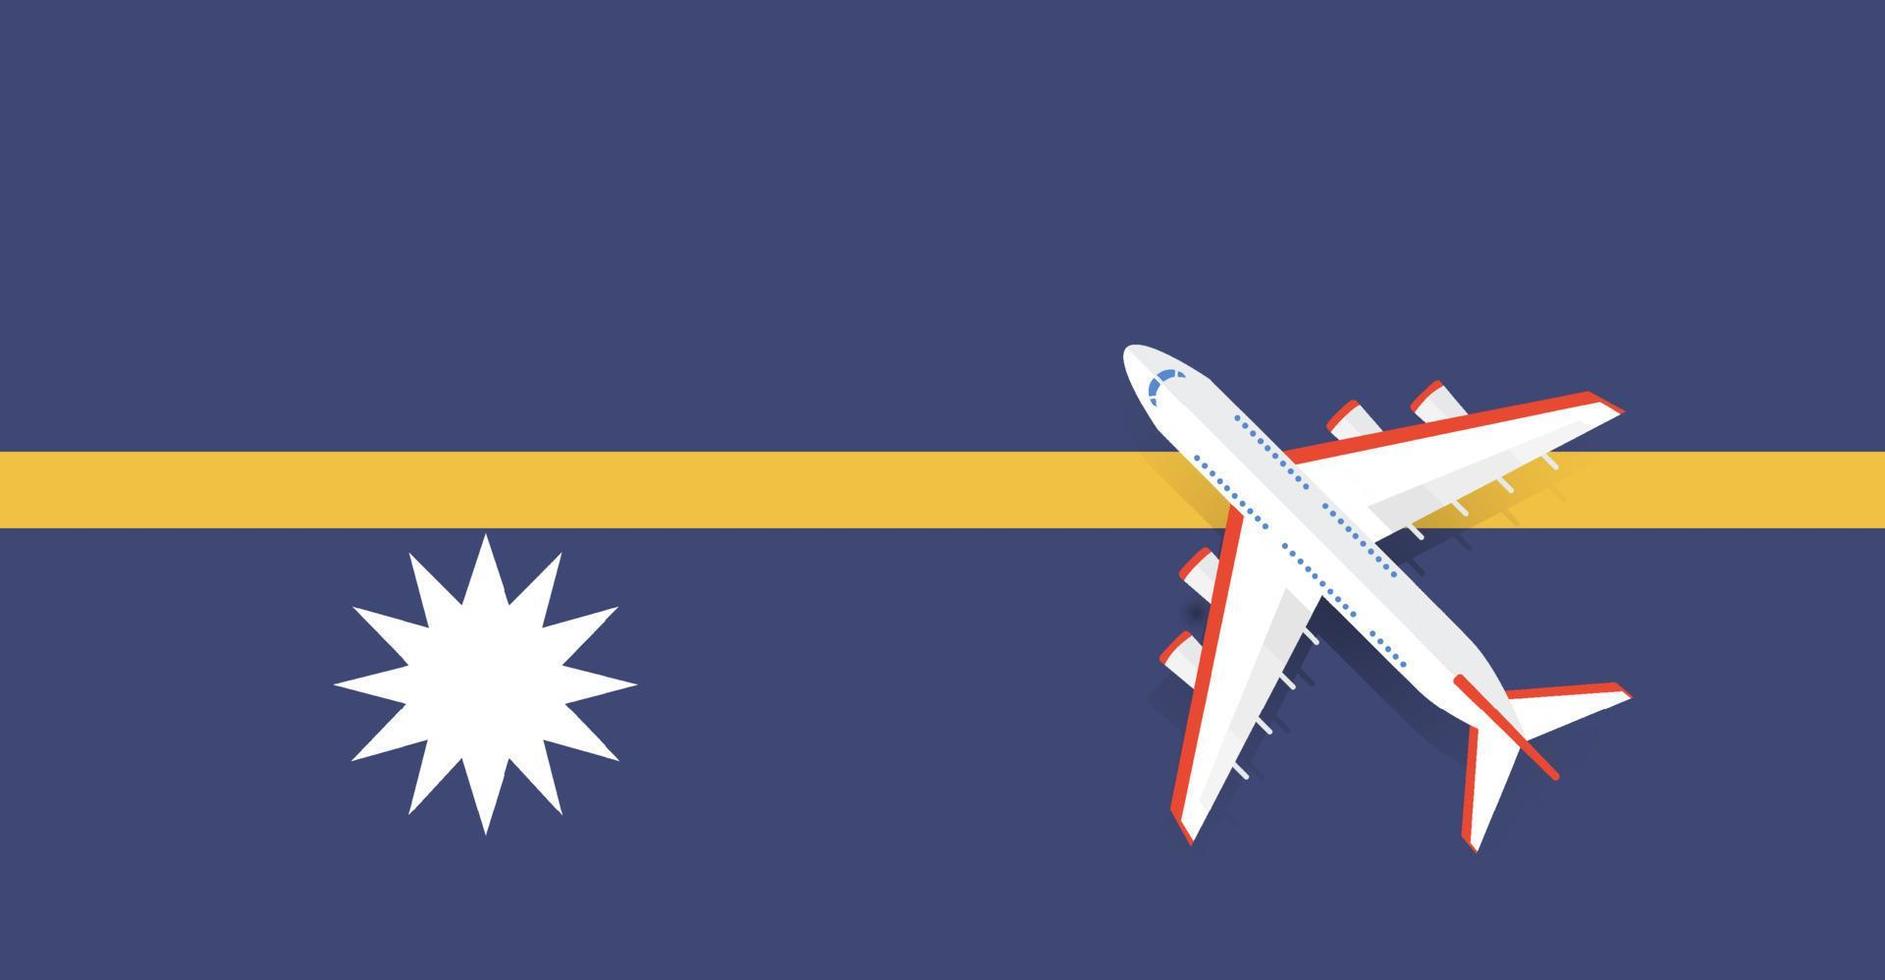 Vector Illustration of a passenger plane flying over the flag of Nauru. Concept of tourism and travel